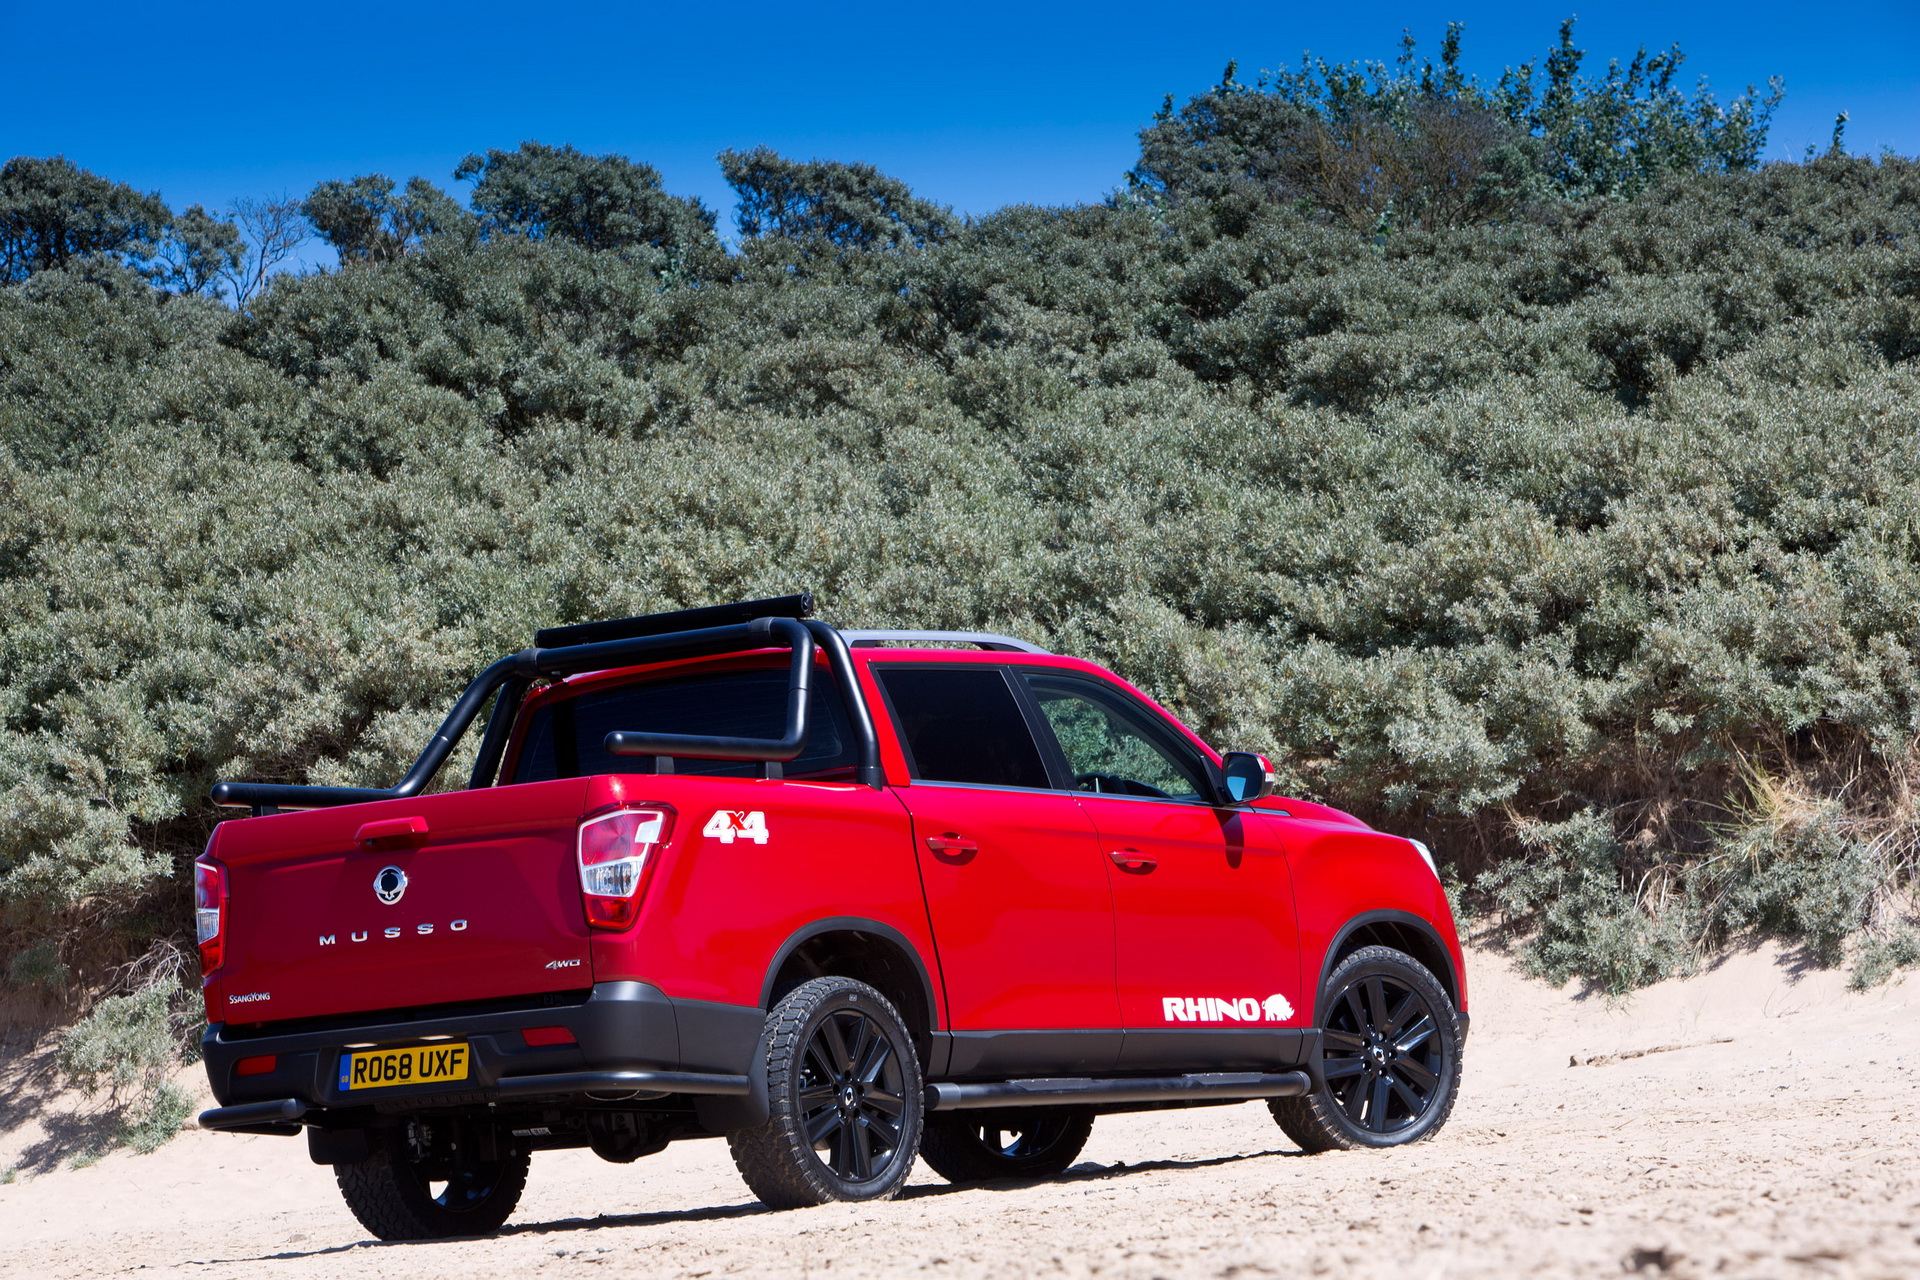 New Ssangyong Musso Pickup Priced From £19,995* In The UK | Carscoops